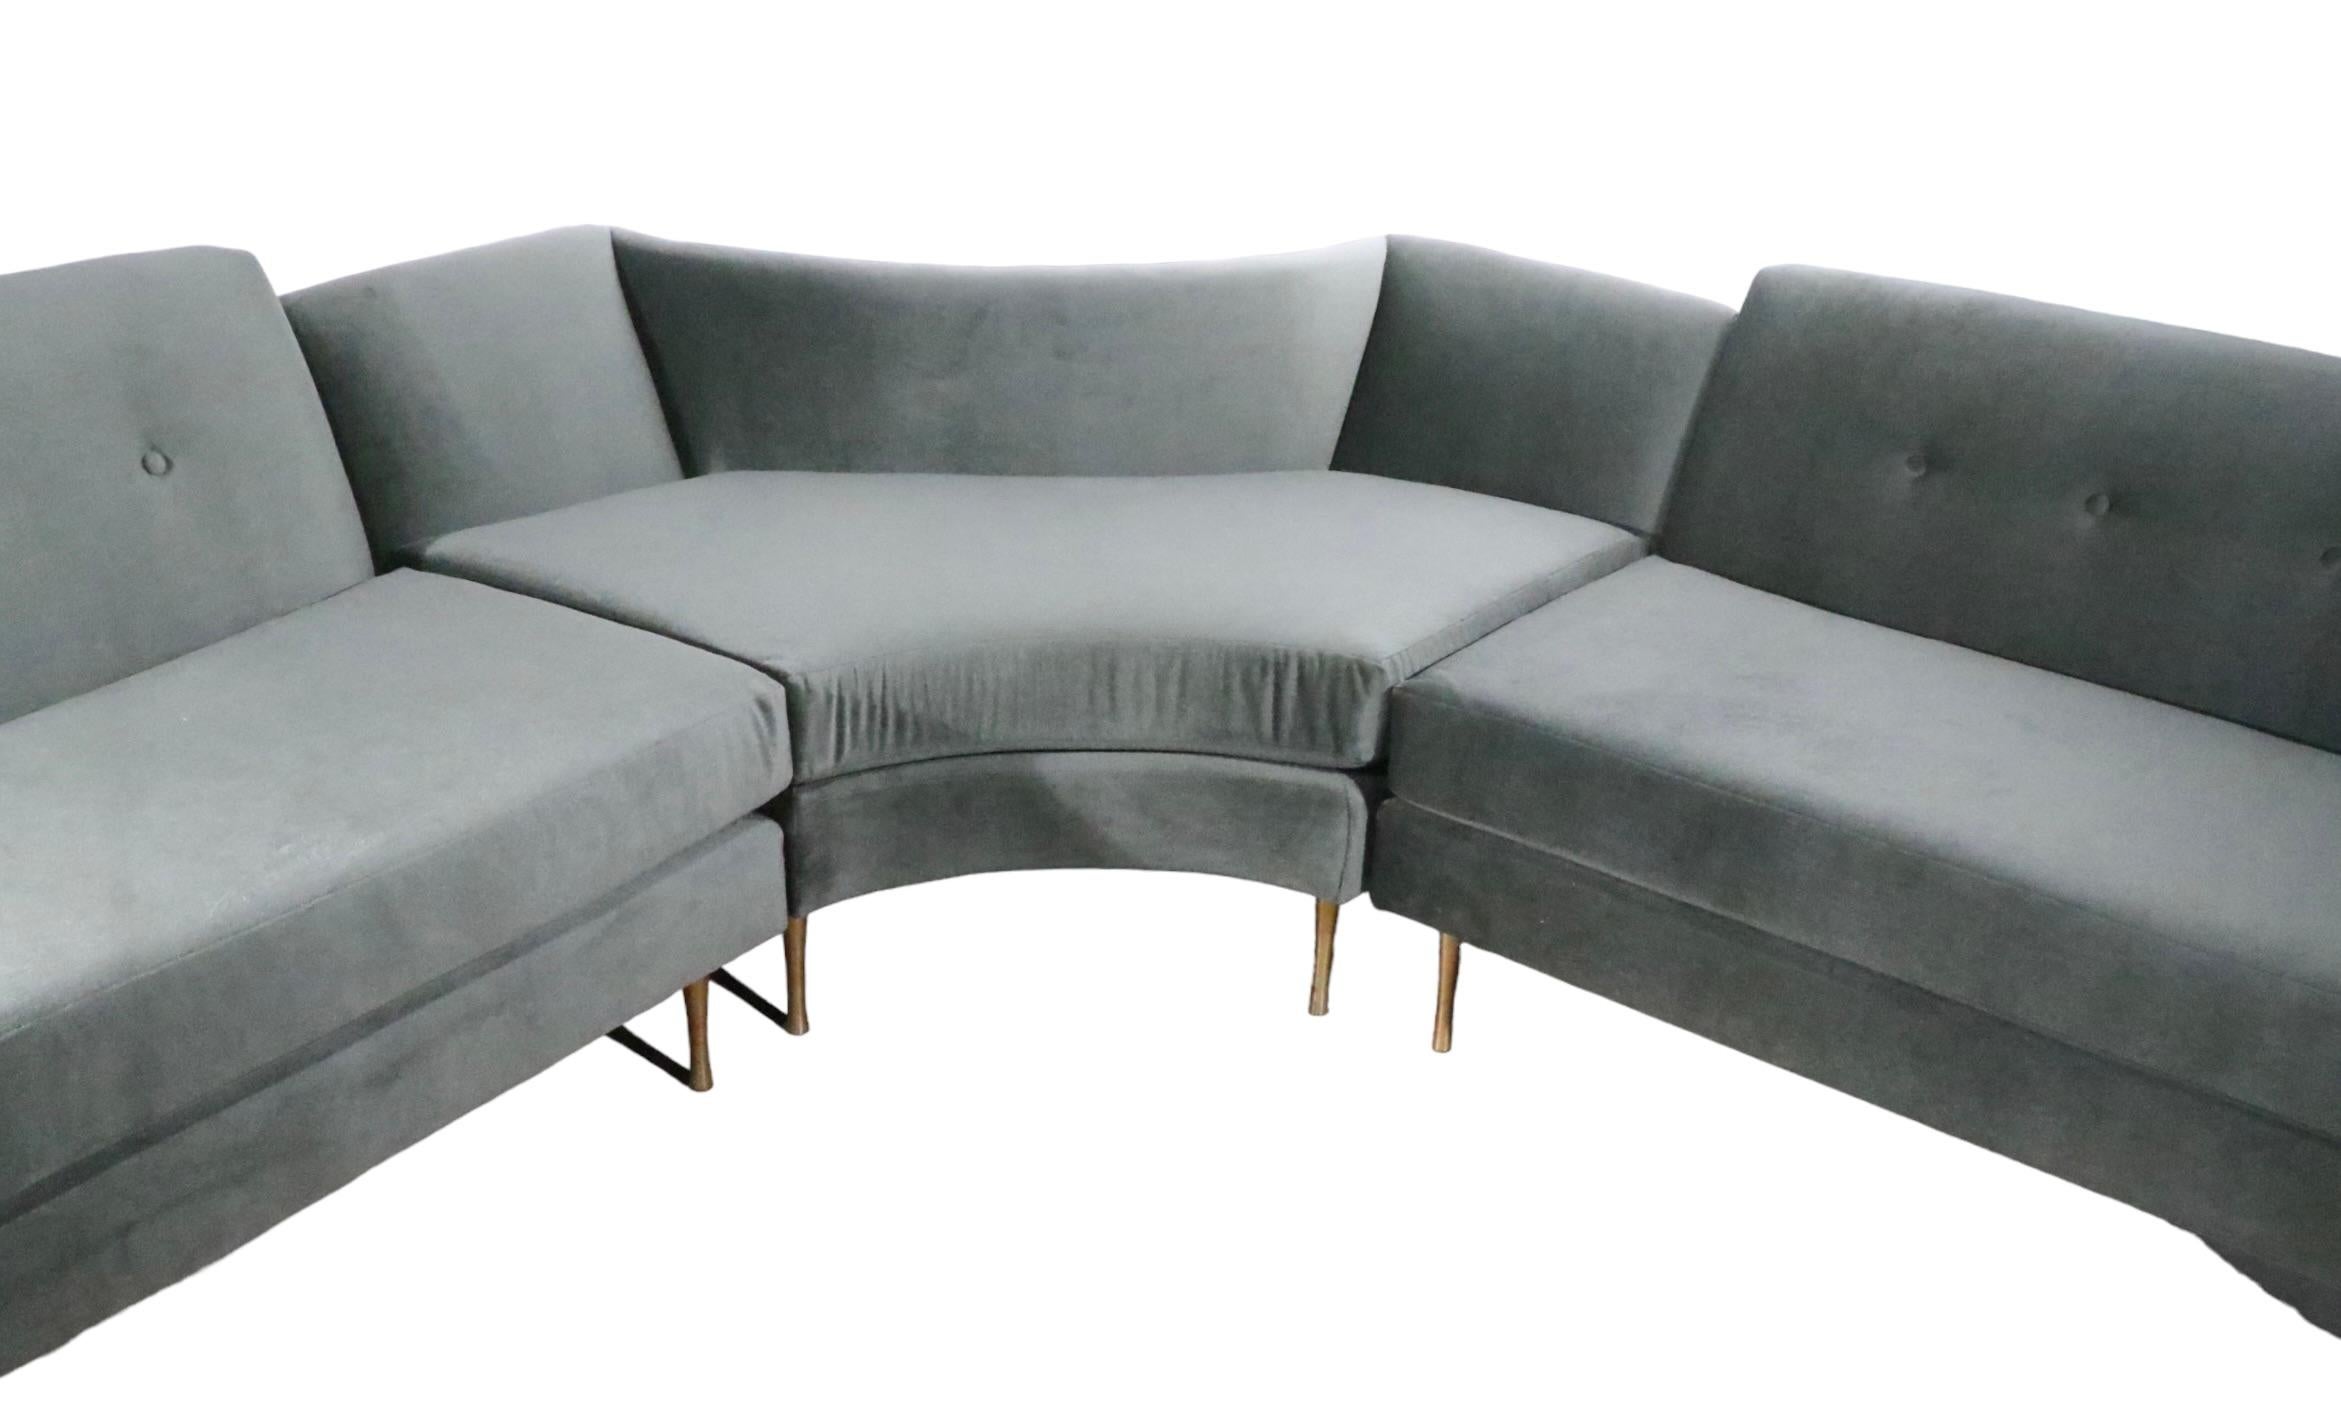 American Glamorous Hollywood Regency Mid Century Art Deco Sectional Sofa c 1930s/1950s For Sale